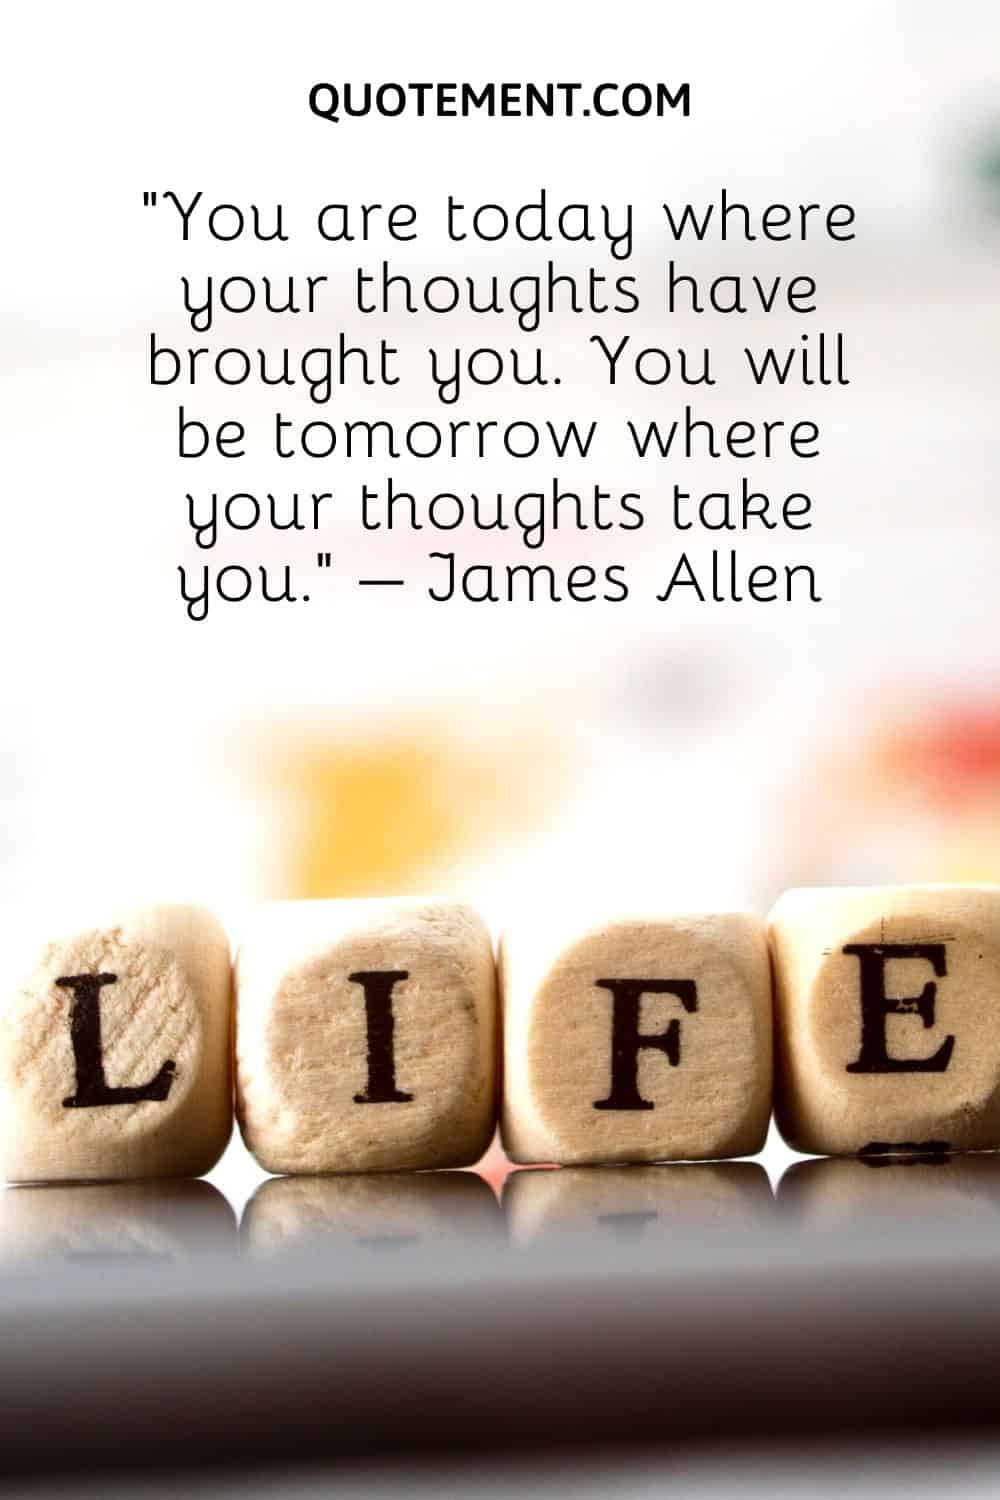 You are today where your thoughts have brought you